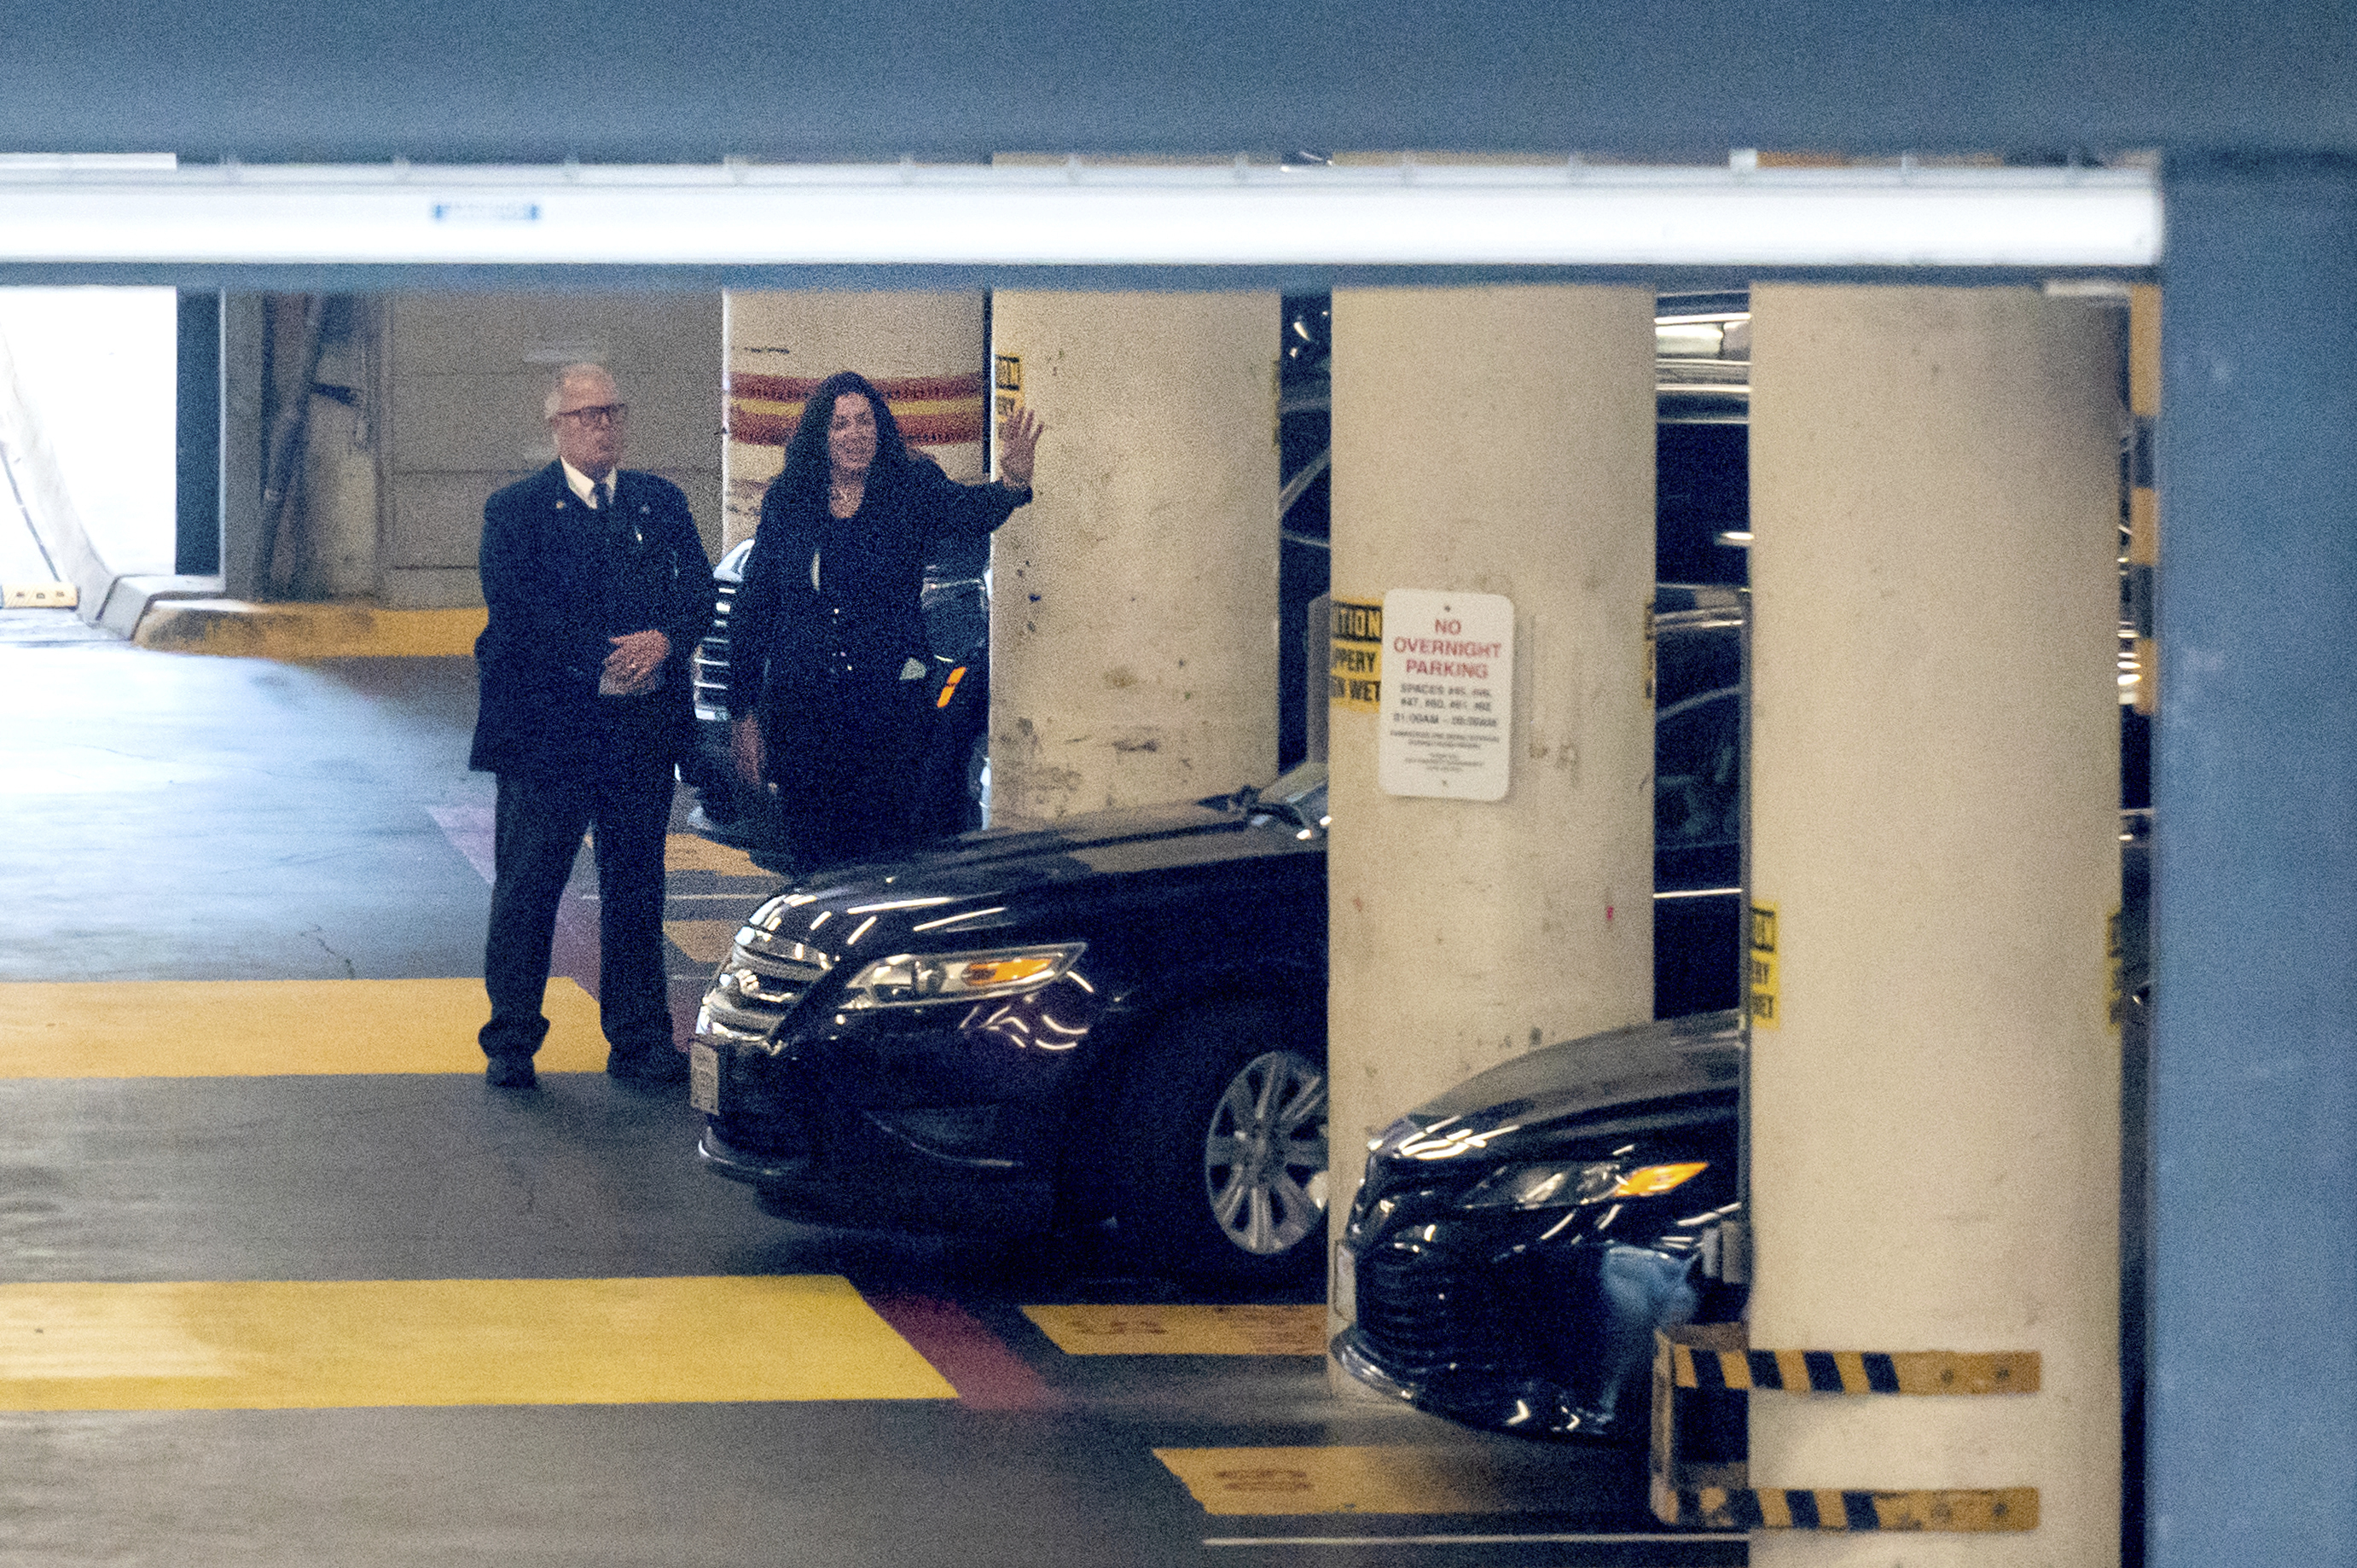 Christine Pelosi walks by two cars in a parking garage beside a man.